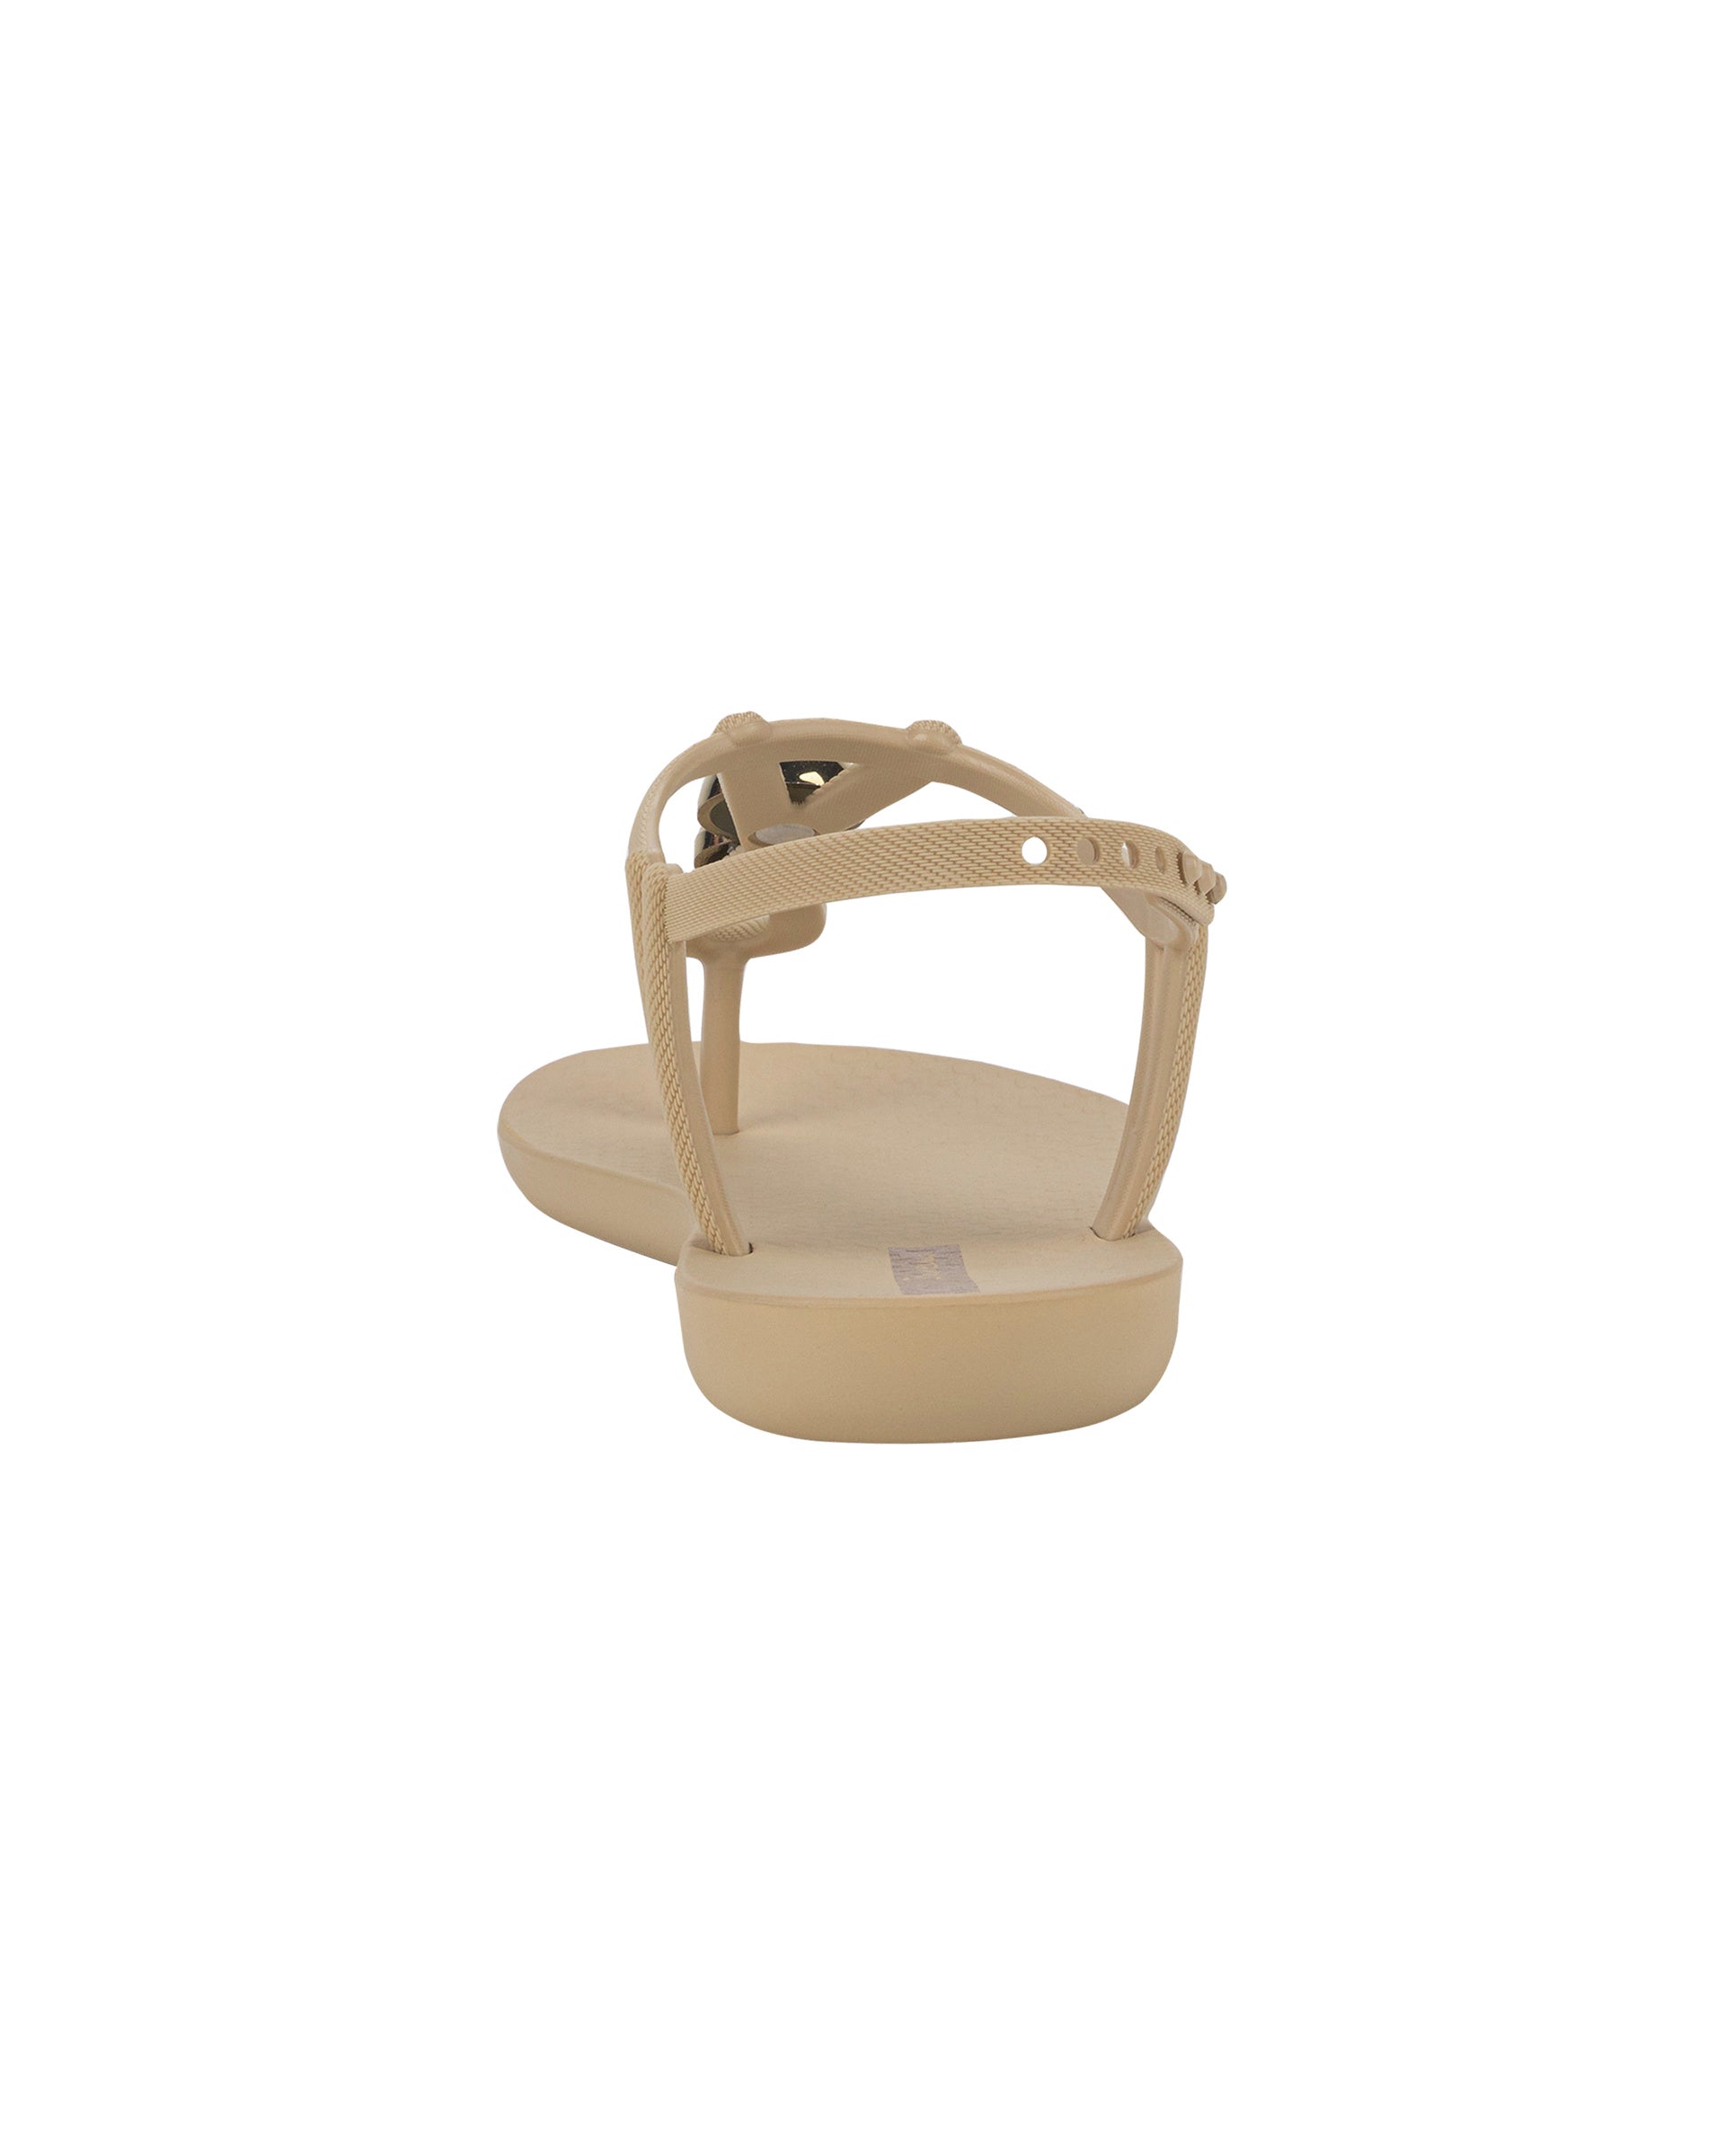 Back view of a beige Ipanema Class Spheres women's t-strap sandal with metallic bauble.